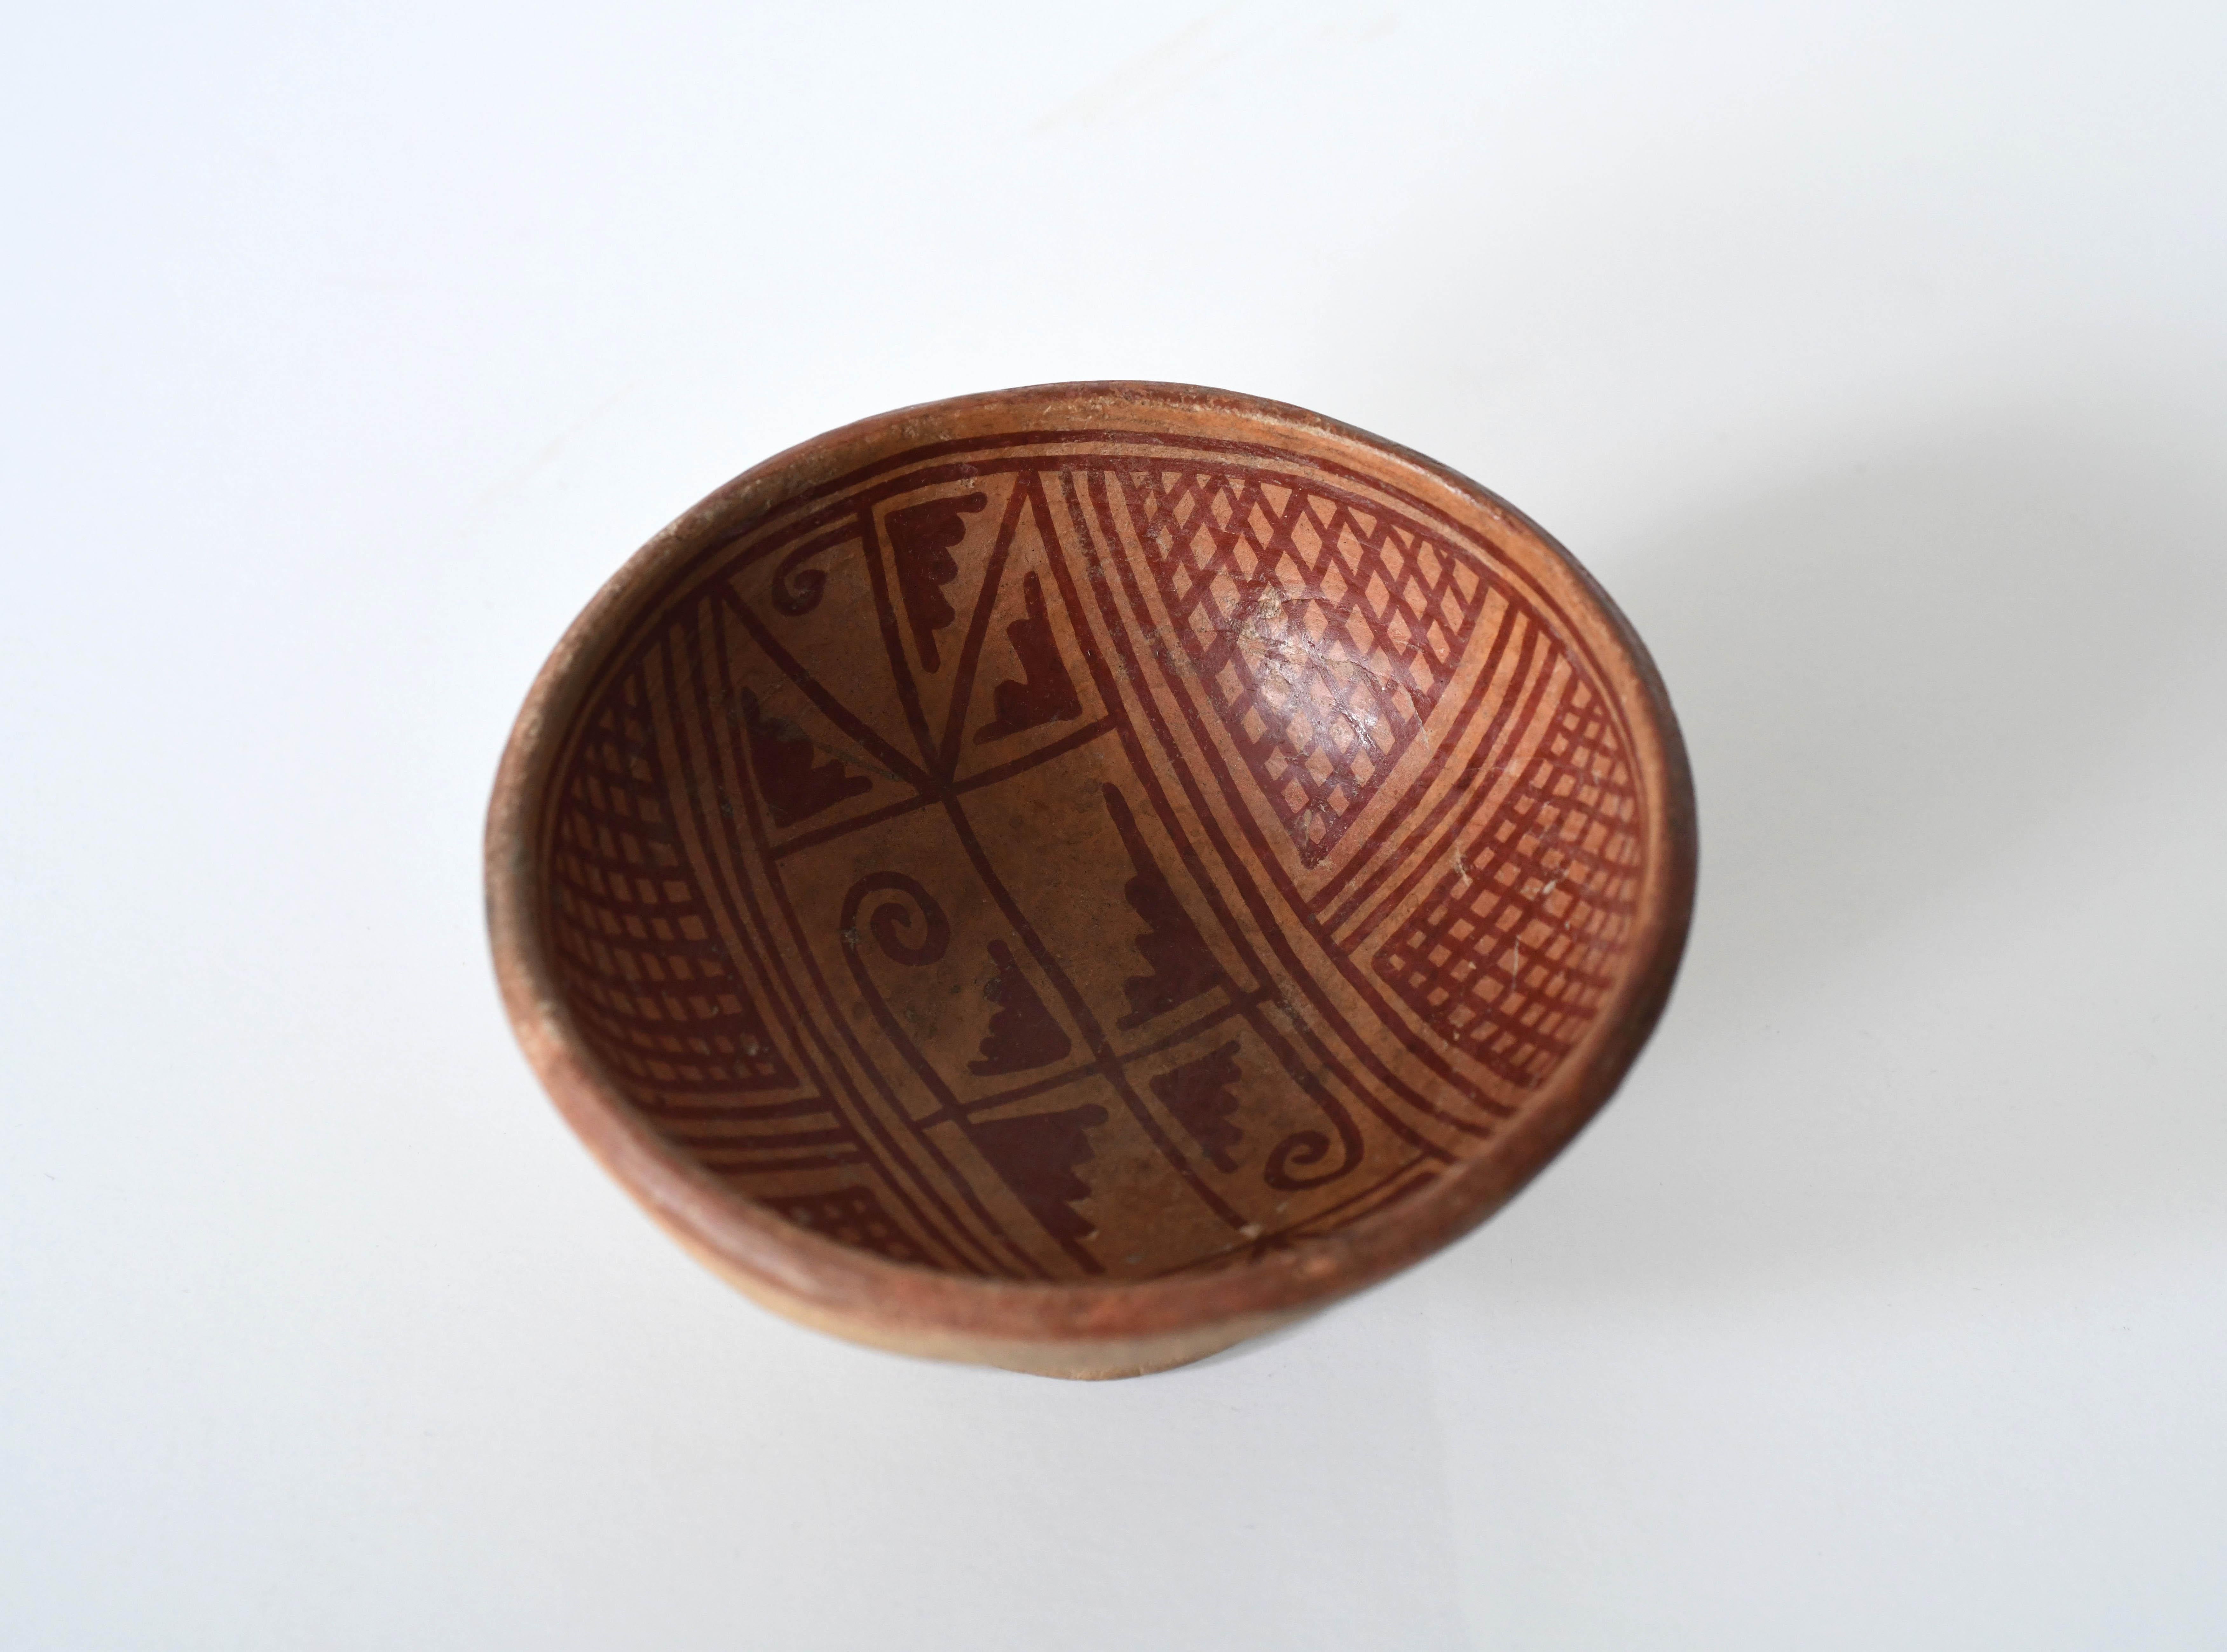 Fine Pre-Columbian Narino footed bowl from Columbia, circa 850 to 1500. Desirable polychrome bowl with vibrant color.